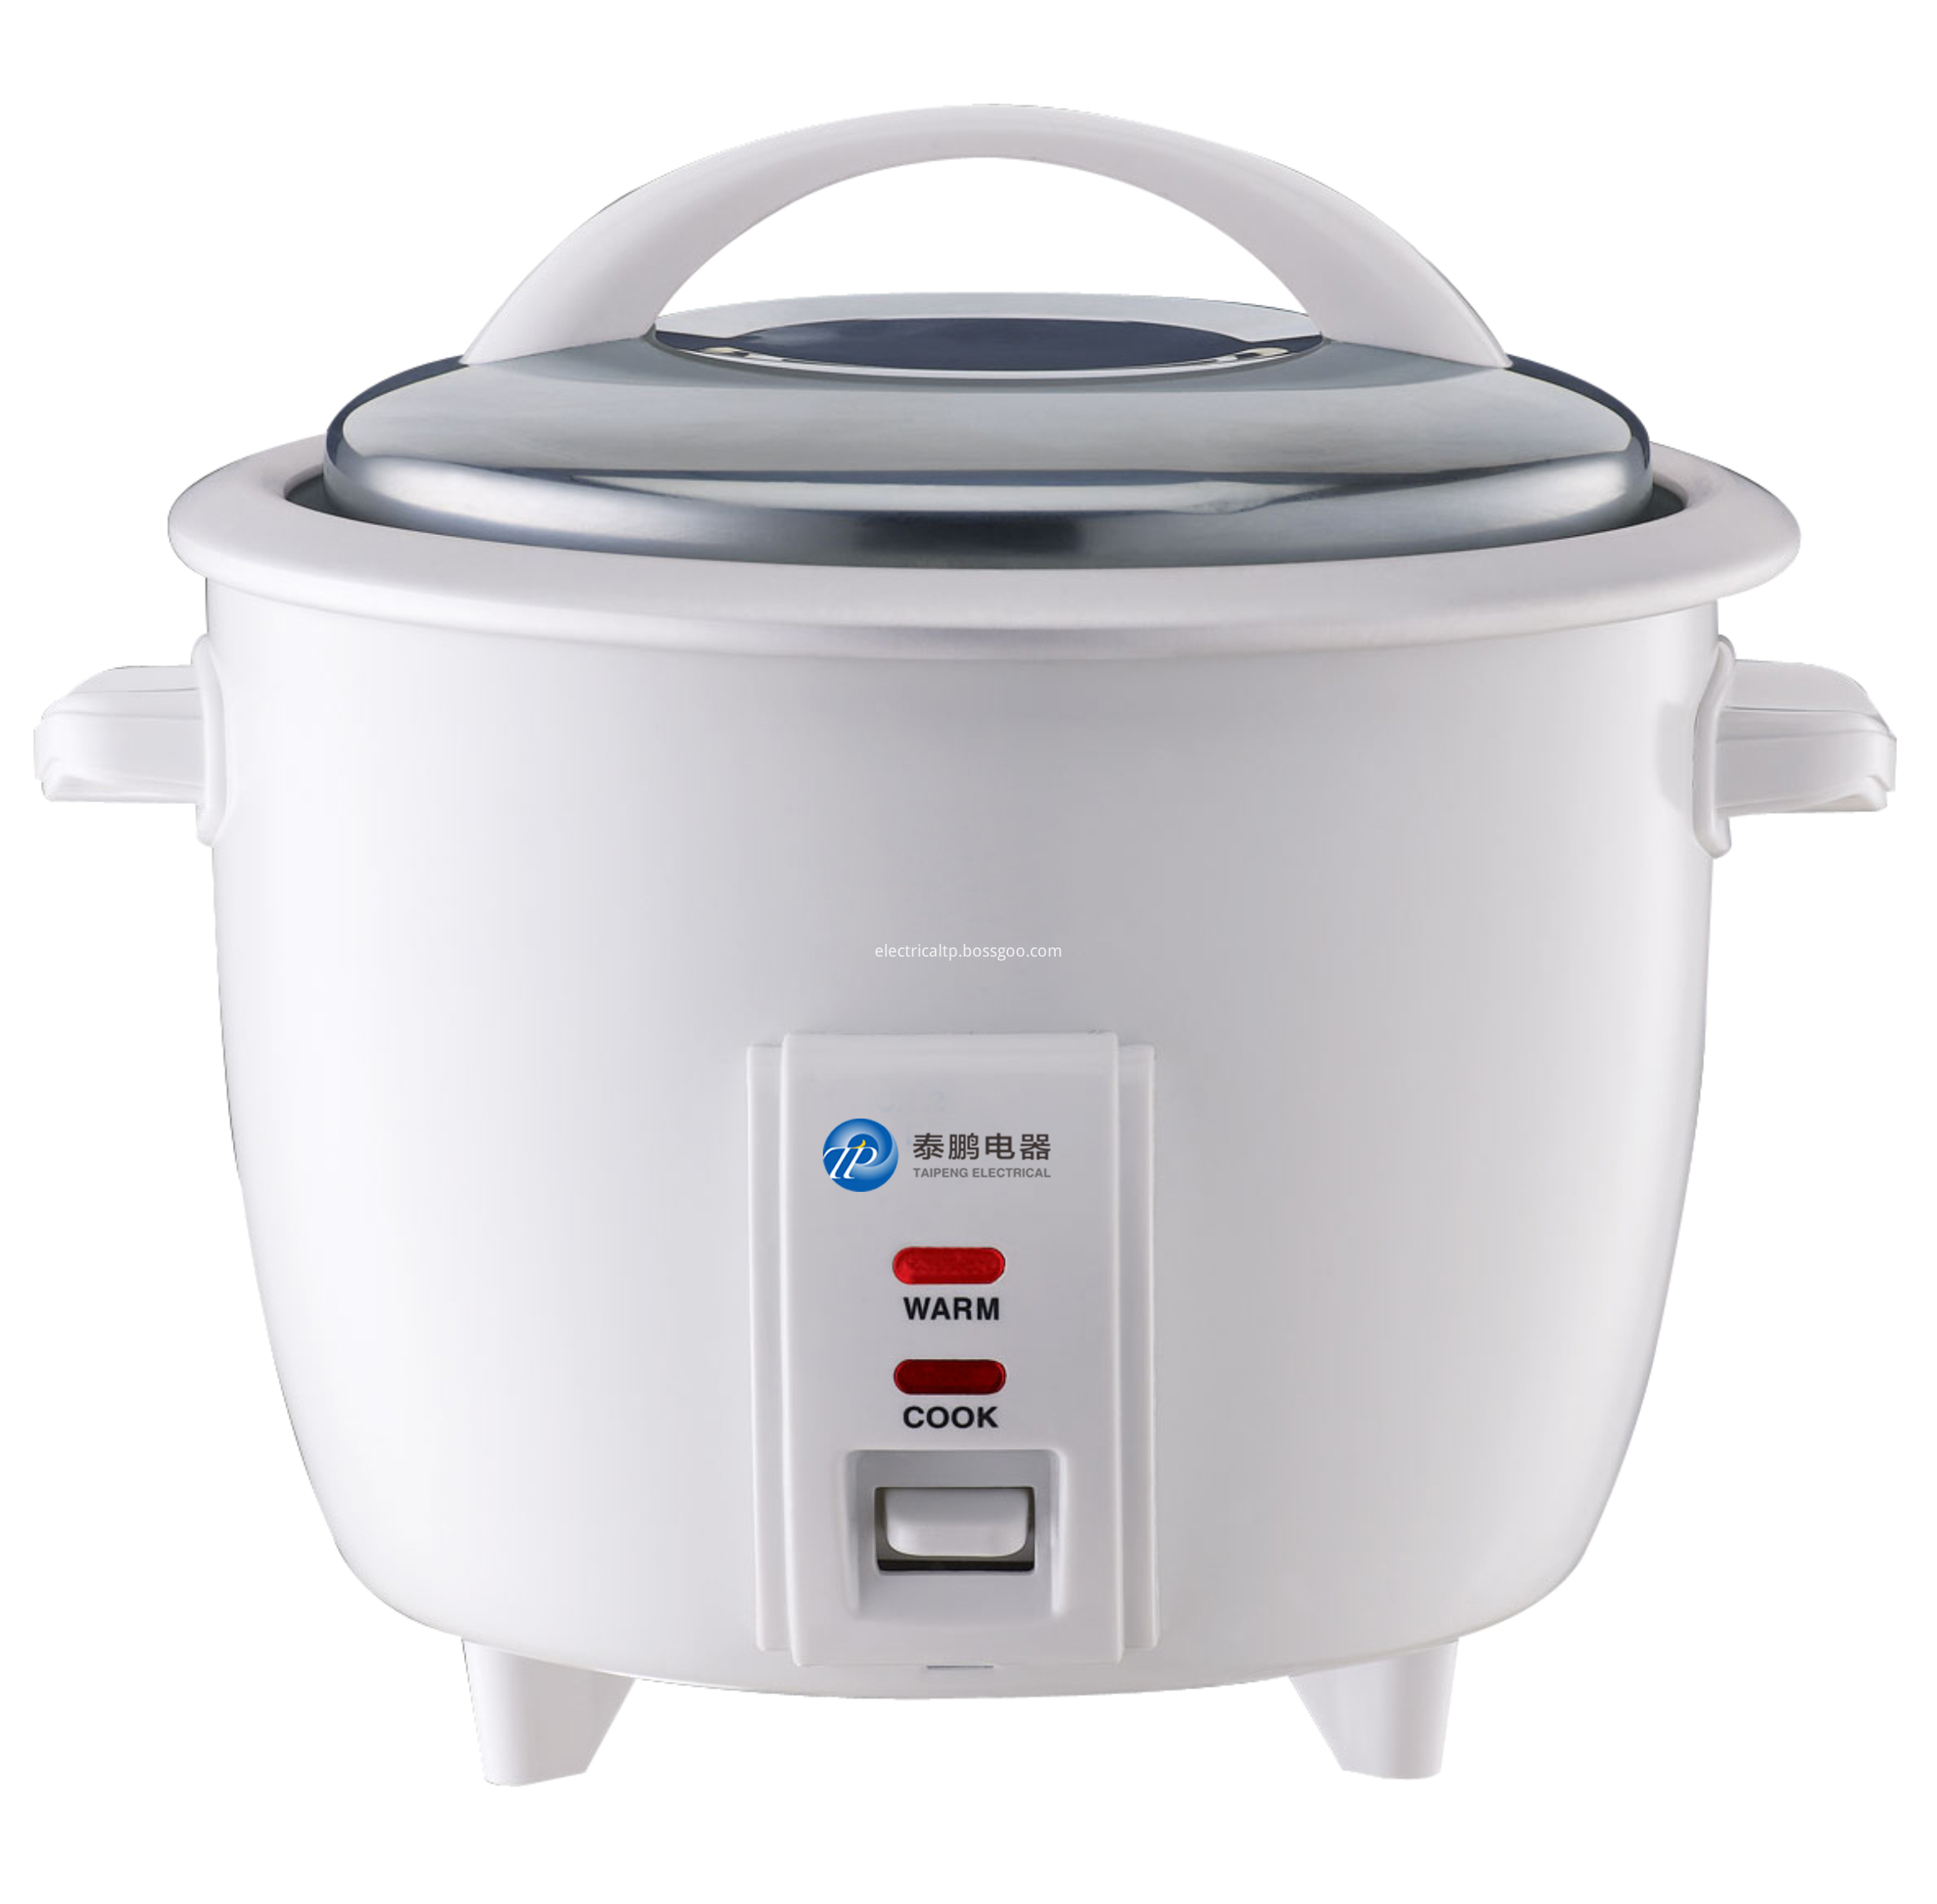 Big size rice cooker 